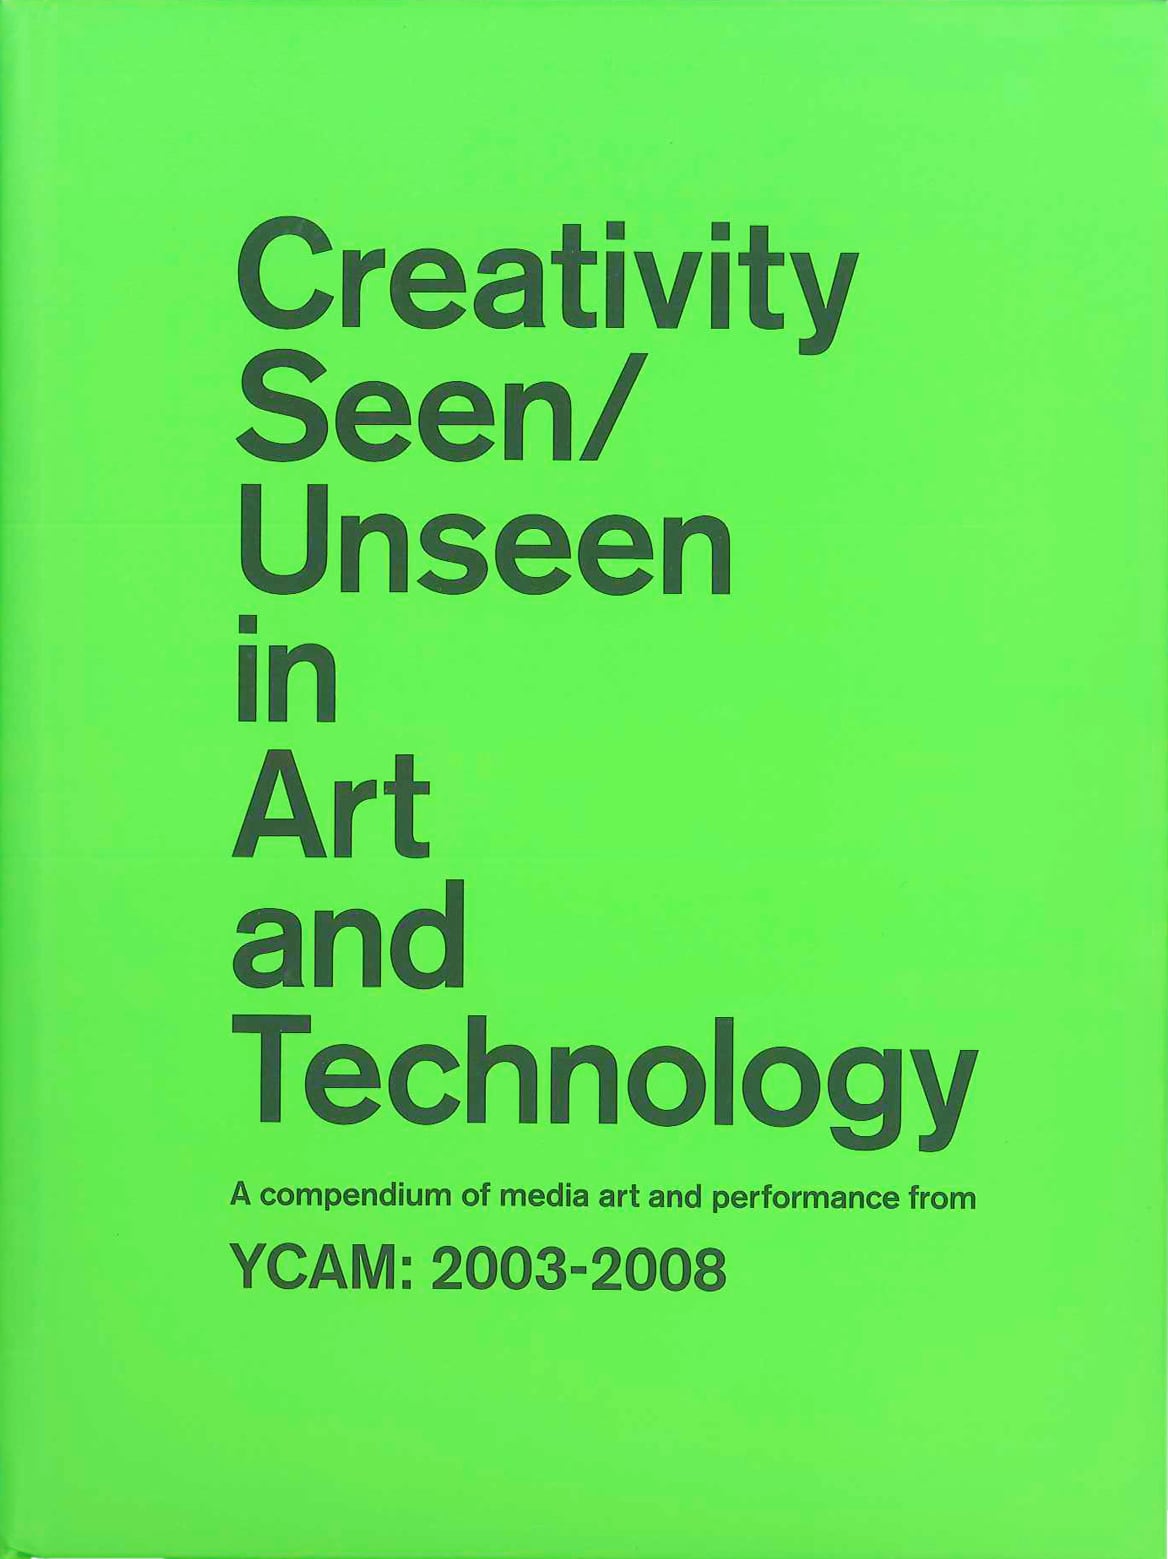 Art　media　Creativity　of　art　Seen/Unseen　2003-2008　in　YCAM:　and　iT　Technology　A　compendium　performance　from　ART